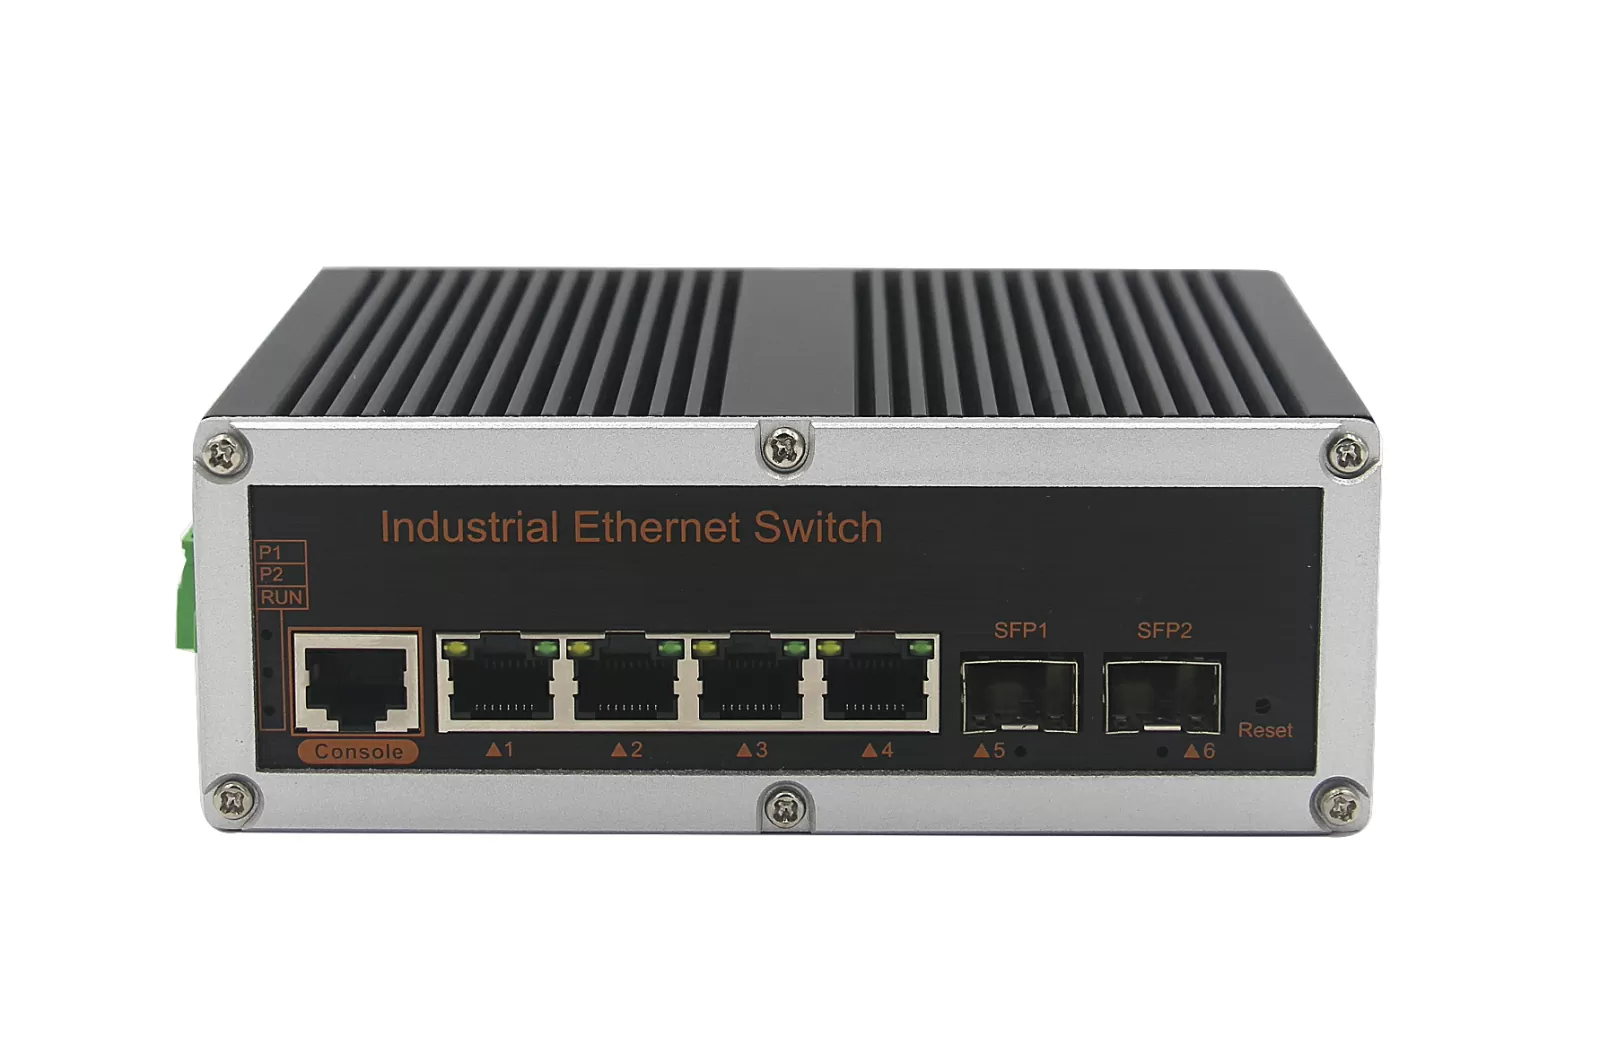 What Are the Advantages of Using a Port Ethernet Switch in Networking?